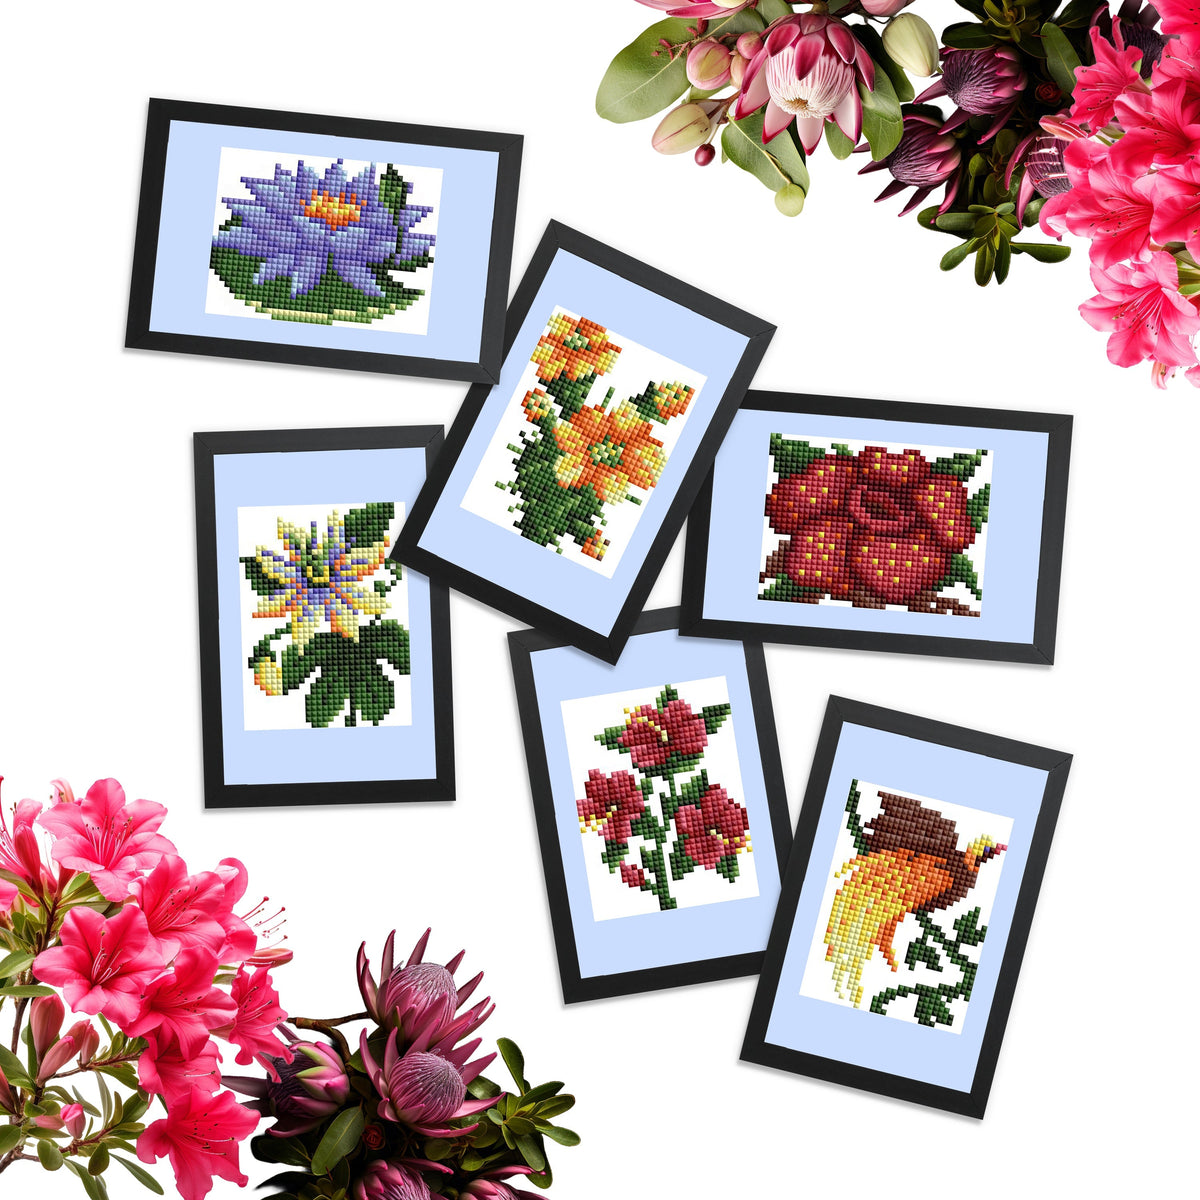 Diamond Painting Mini Dazzles - Exotic Flower Set 3x4"(7.6cm"x10.2cm) / Square With 22 Colors Including 1 AB and 21 Fairy Dust Diamonds / 4,823